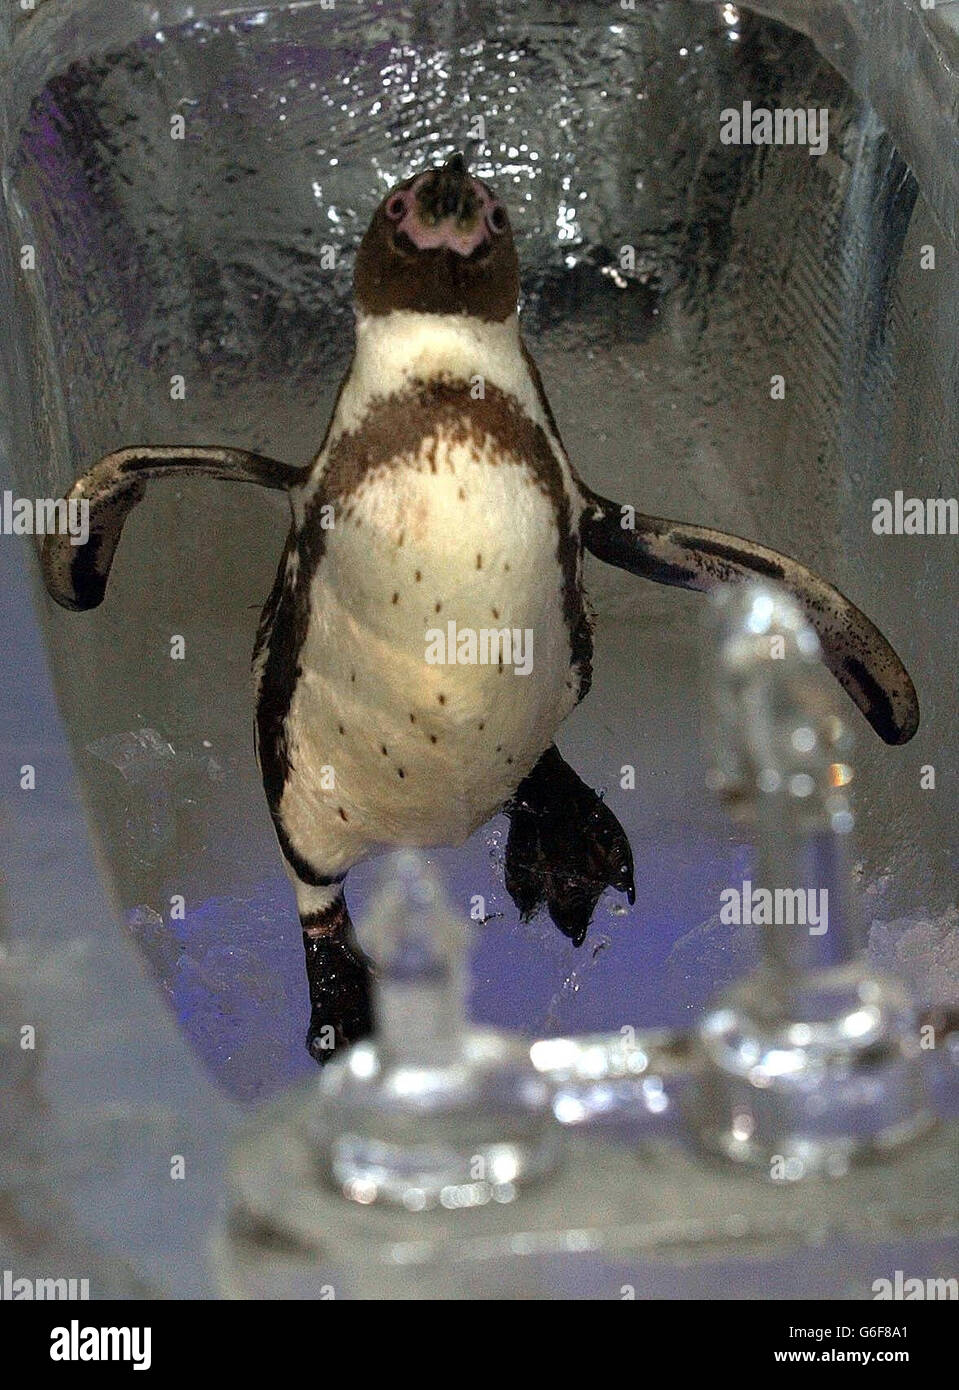 Bobby the penguin enjoys a paddle in a bath made completely of ice at Old Billingsgate Market, London, as electronics company Samsung - who constructed an ice house - launch a new range of home appliances. * The house is made of 3 tonnes of ice, took fives weeks to sculpt and will be in London for only one day before being melted away. Stock Photo